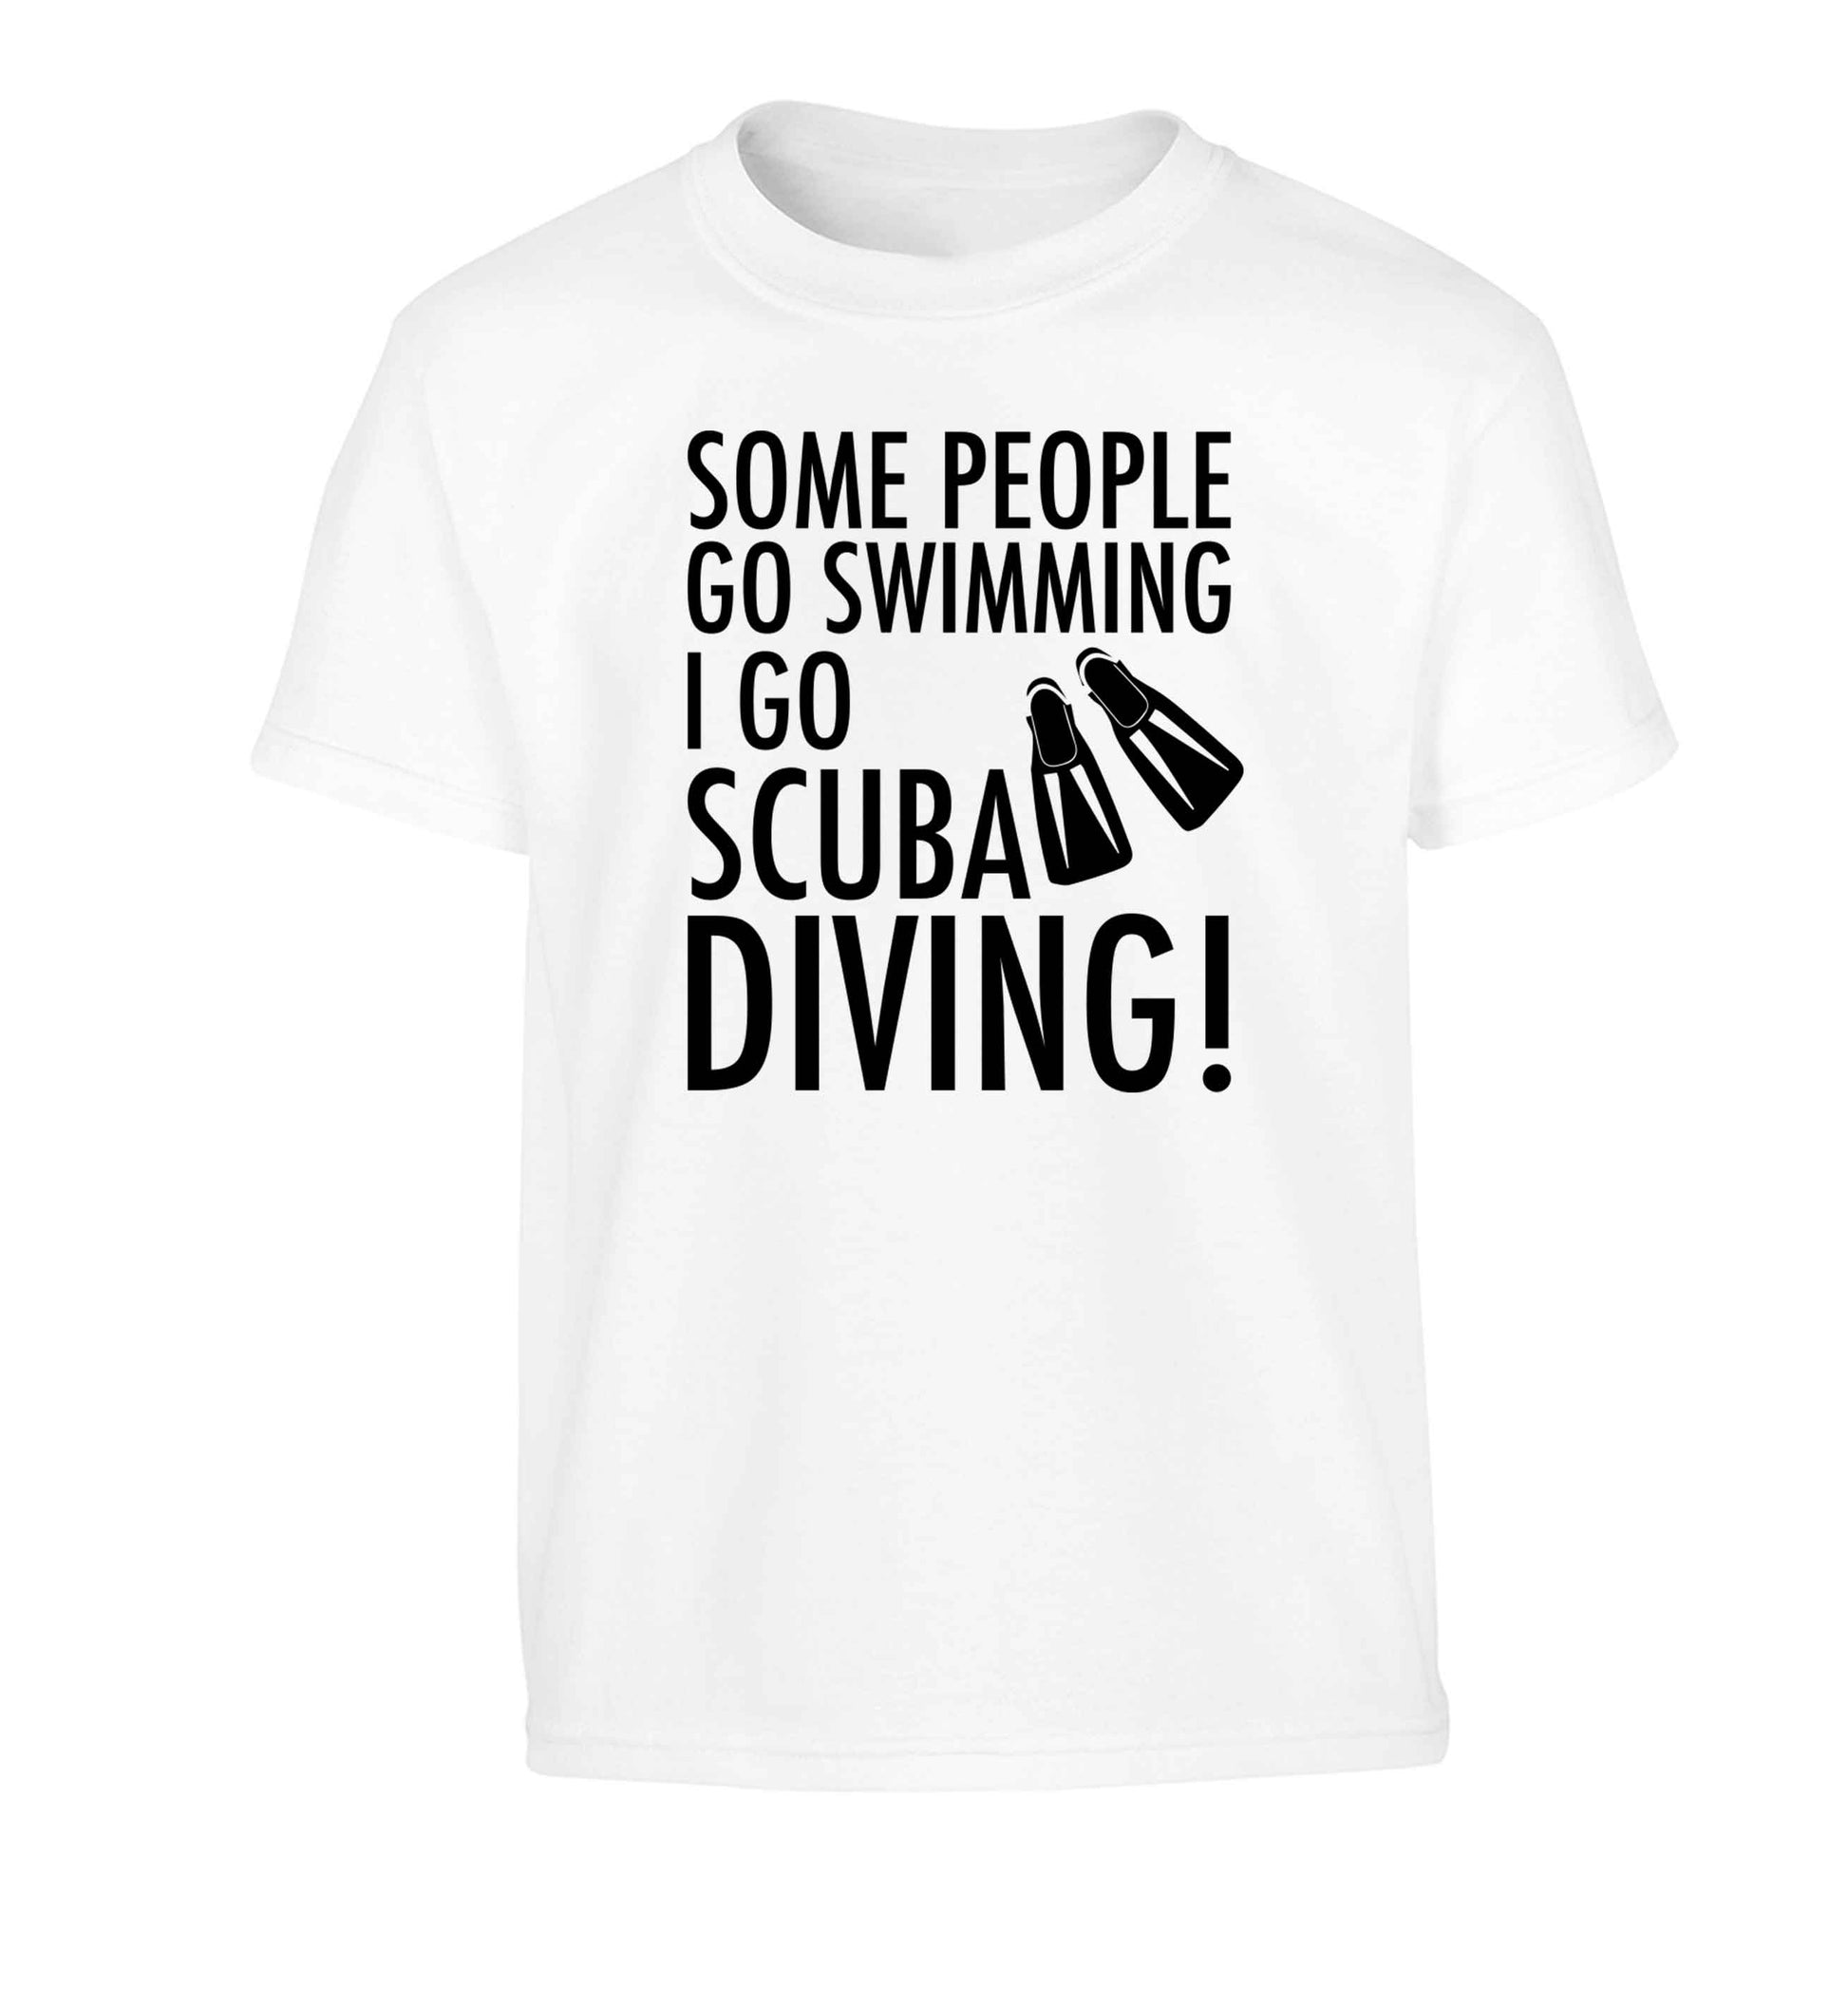 Some people go swimming I go scuba diving! Children's white Tshirt 12-13 Years